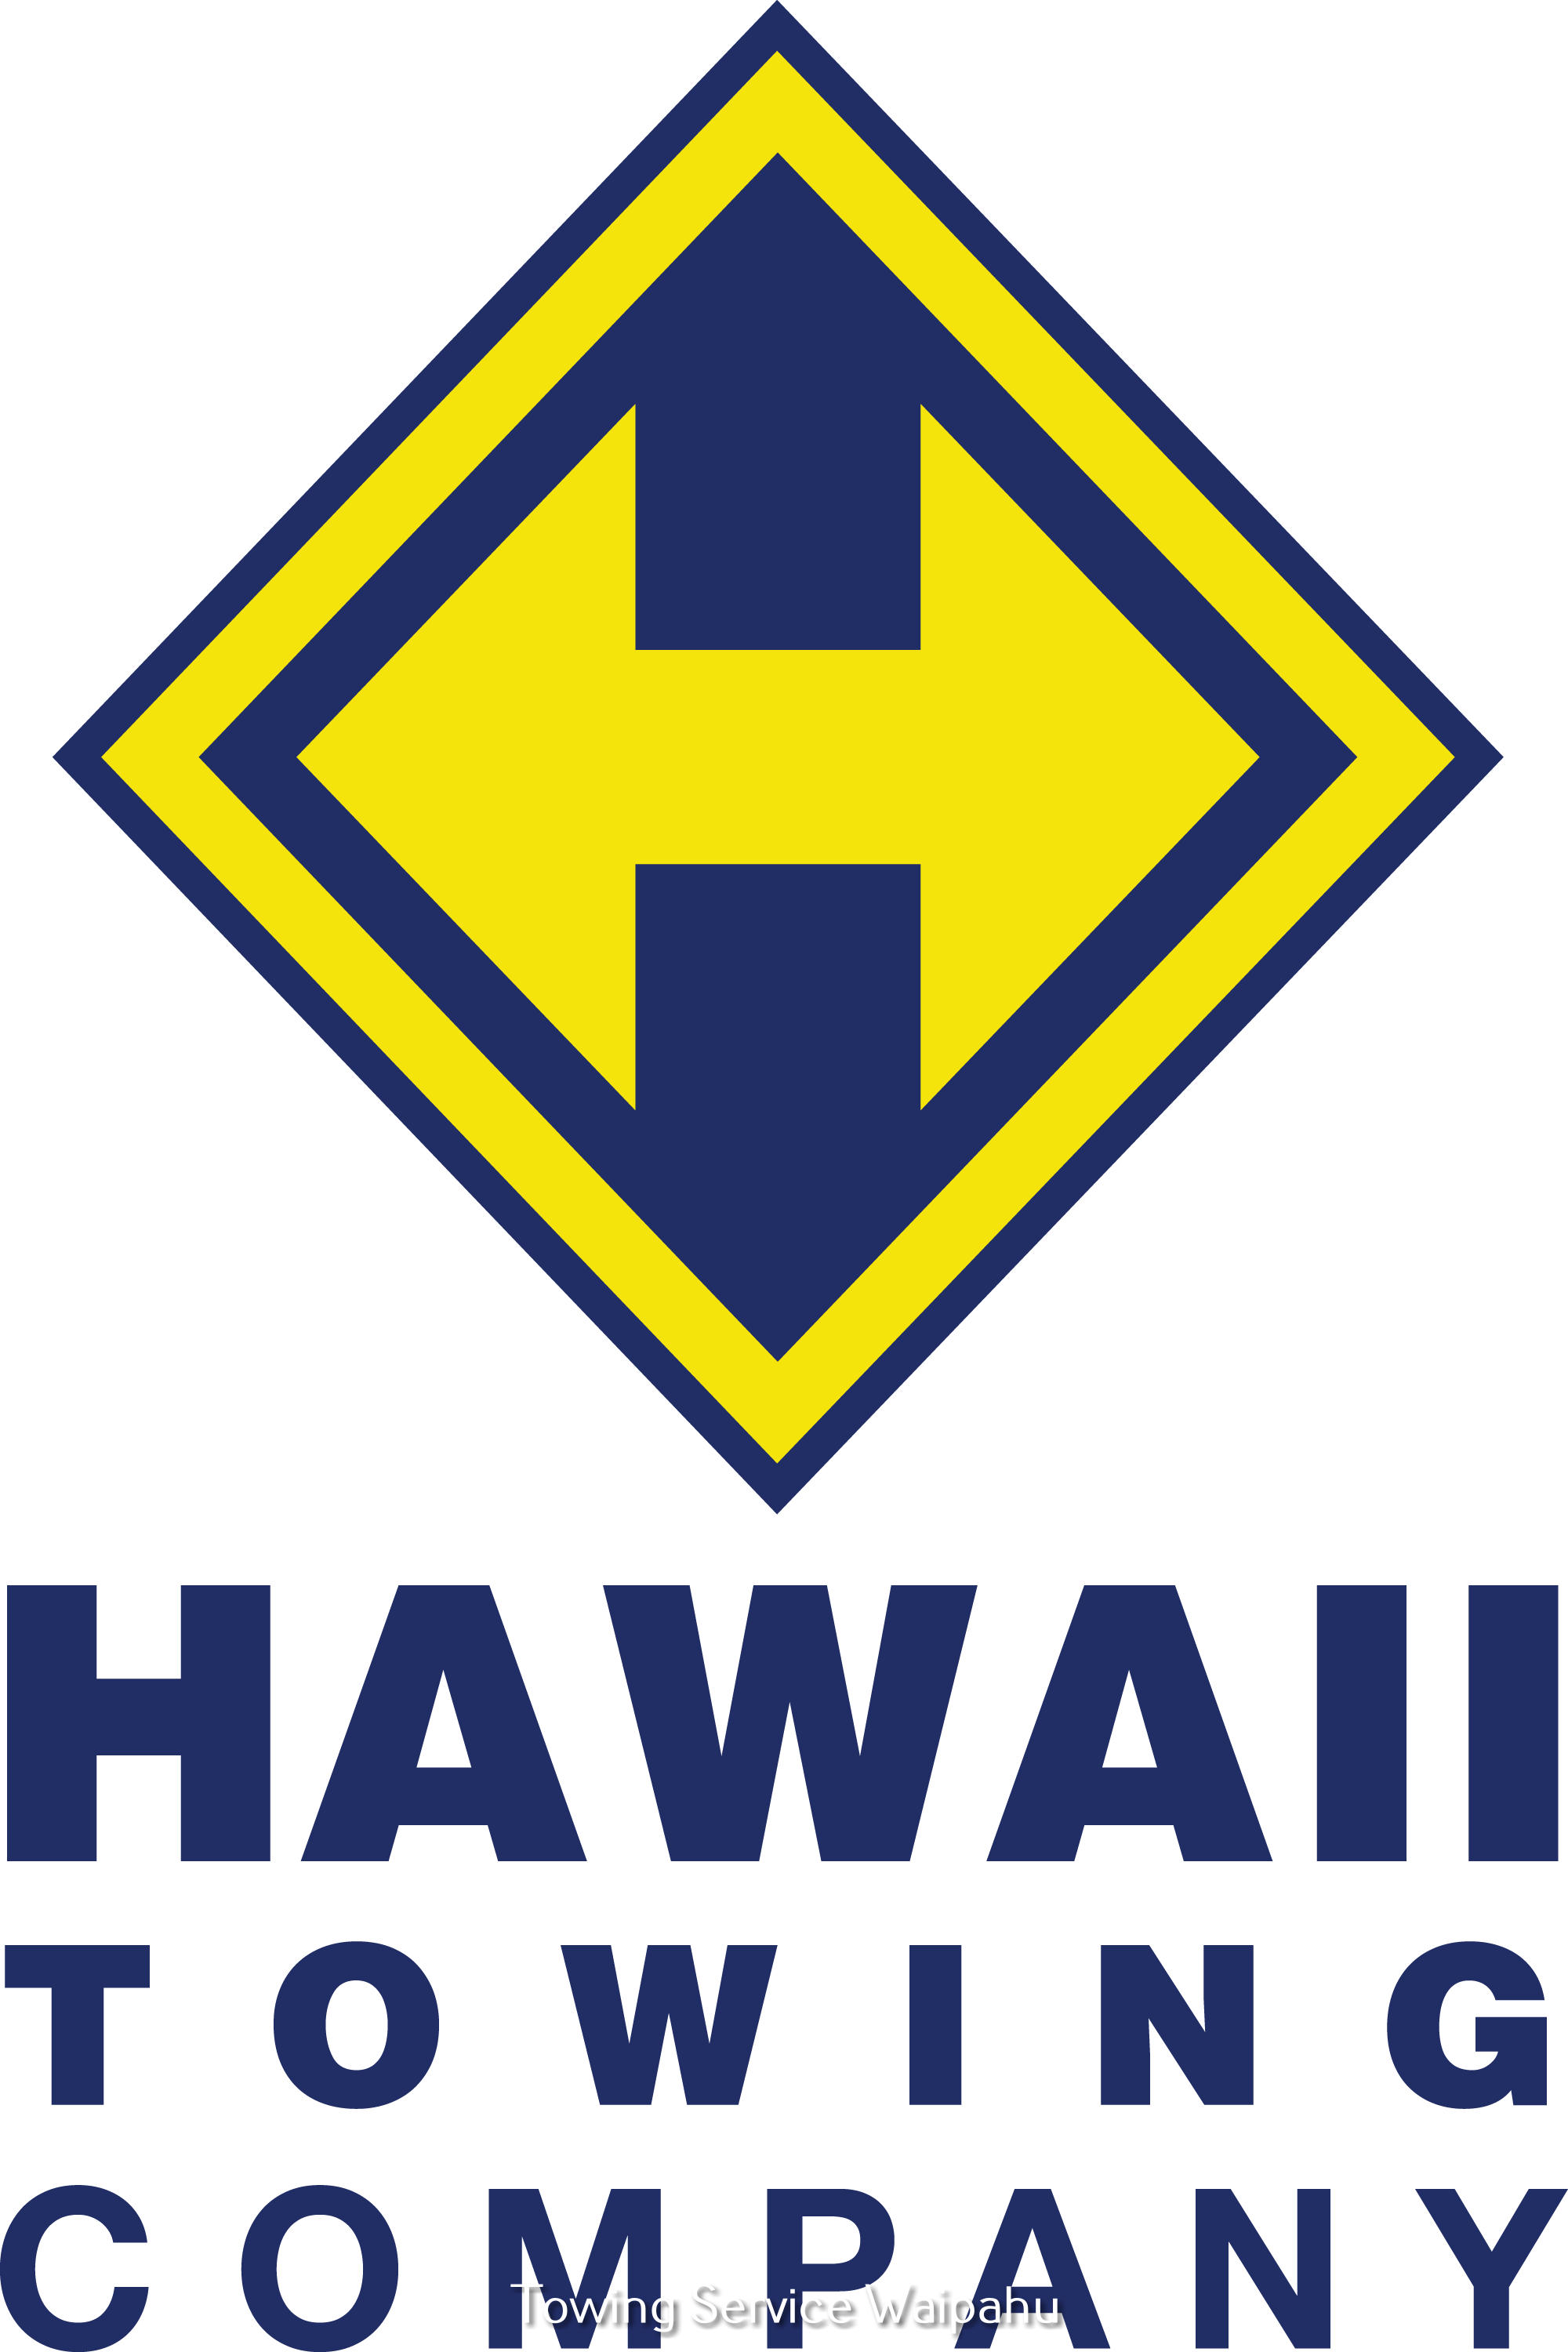 Hawaii Towing Company Inc. Explains Why They are the Go-To Towing Company in Hawaii